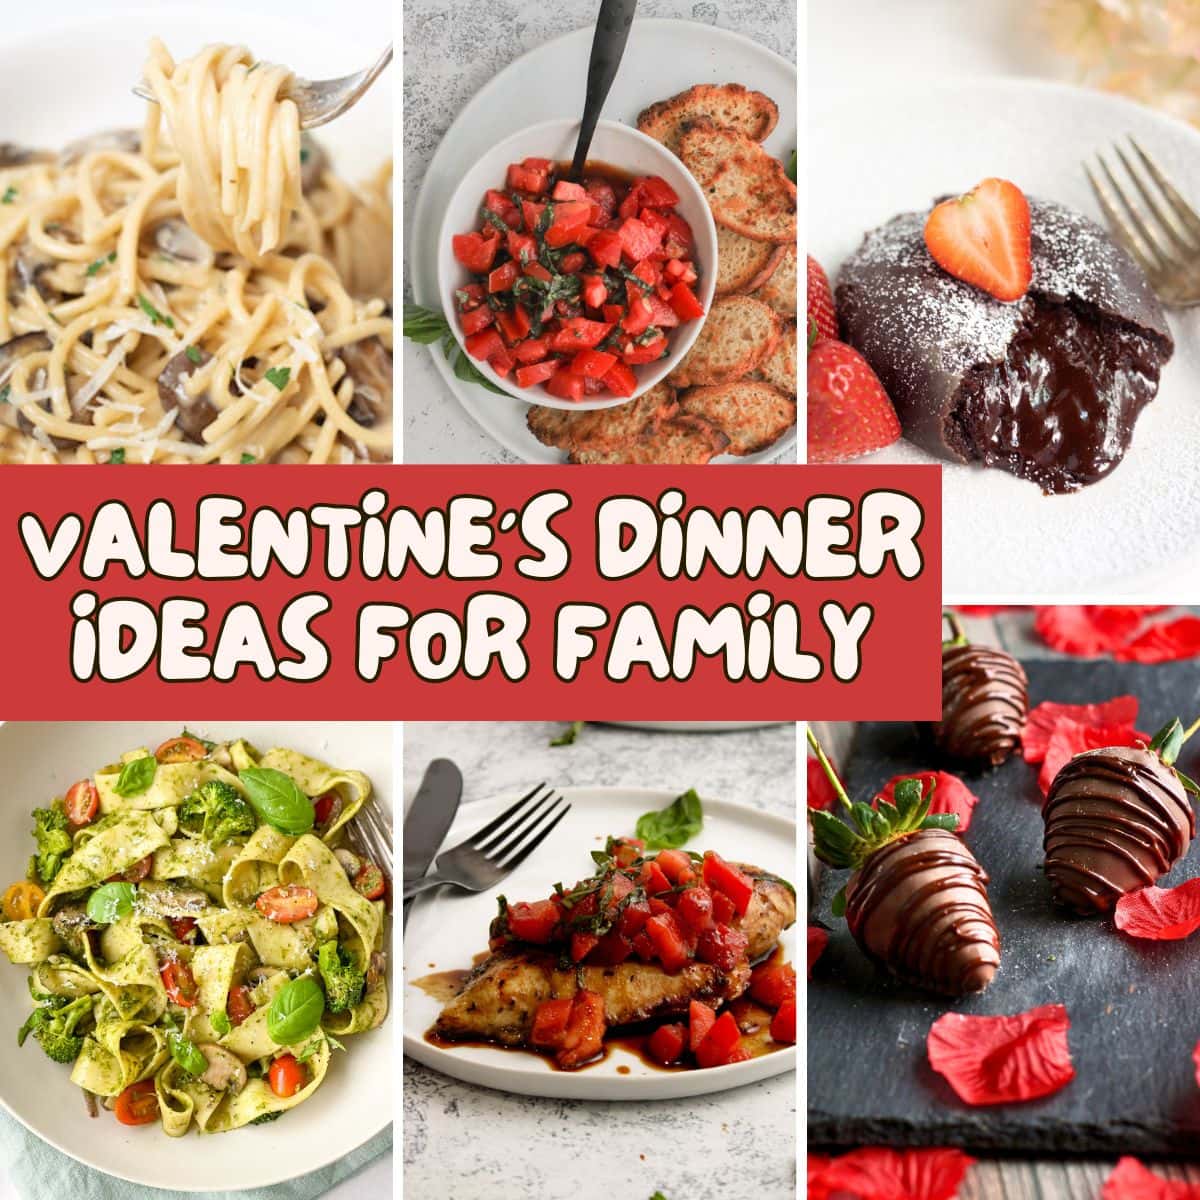 Collage for Valentines dinner ideas for family